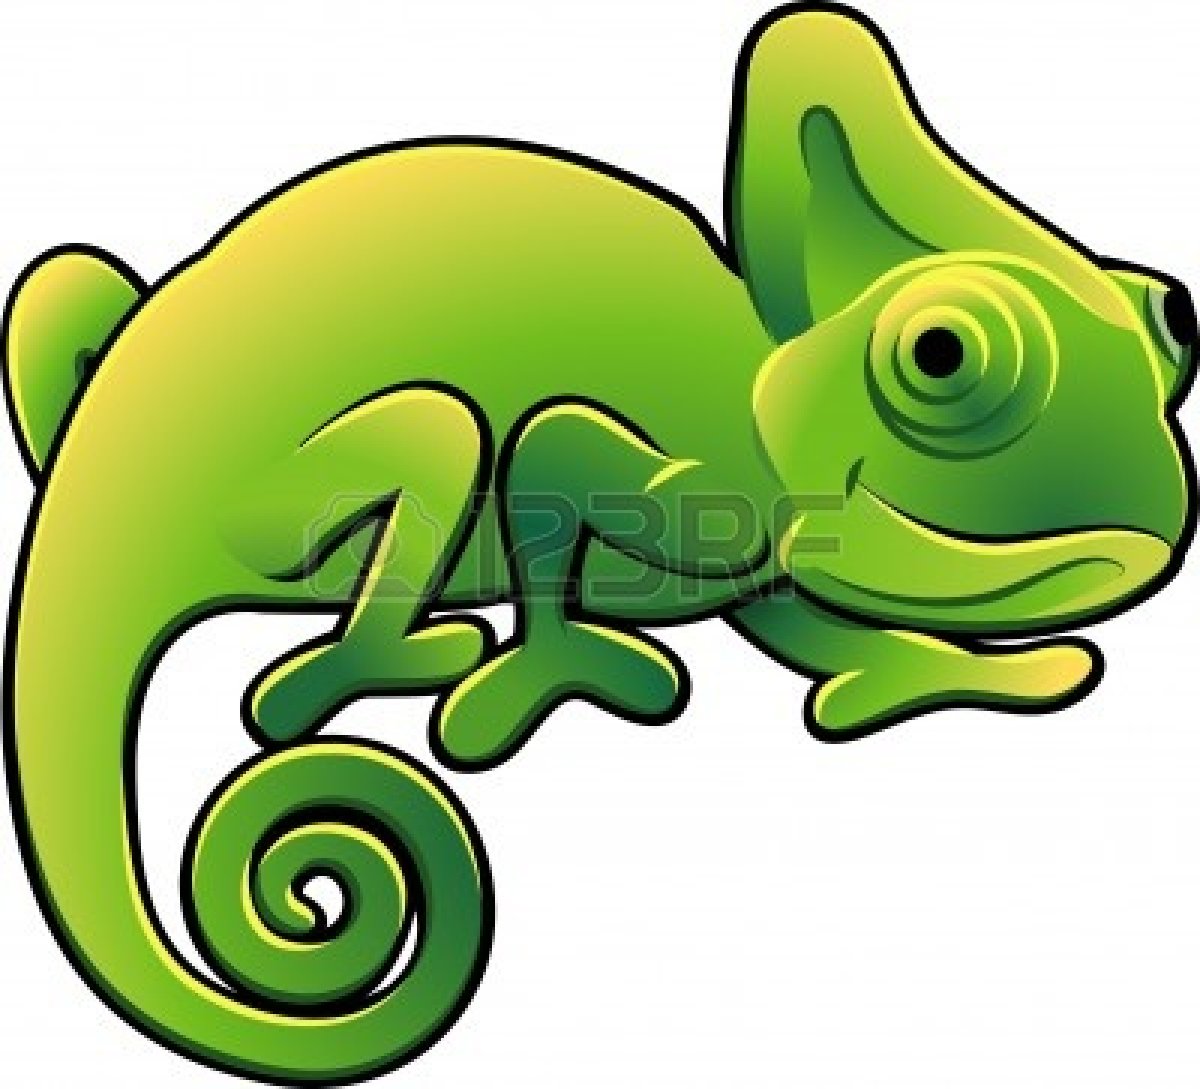 Iguana clipart colorful. Cute lizard free images